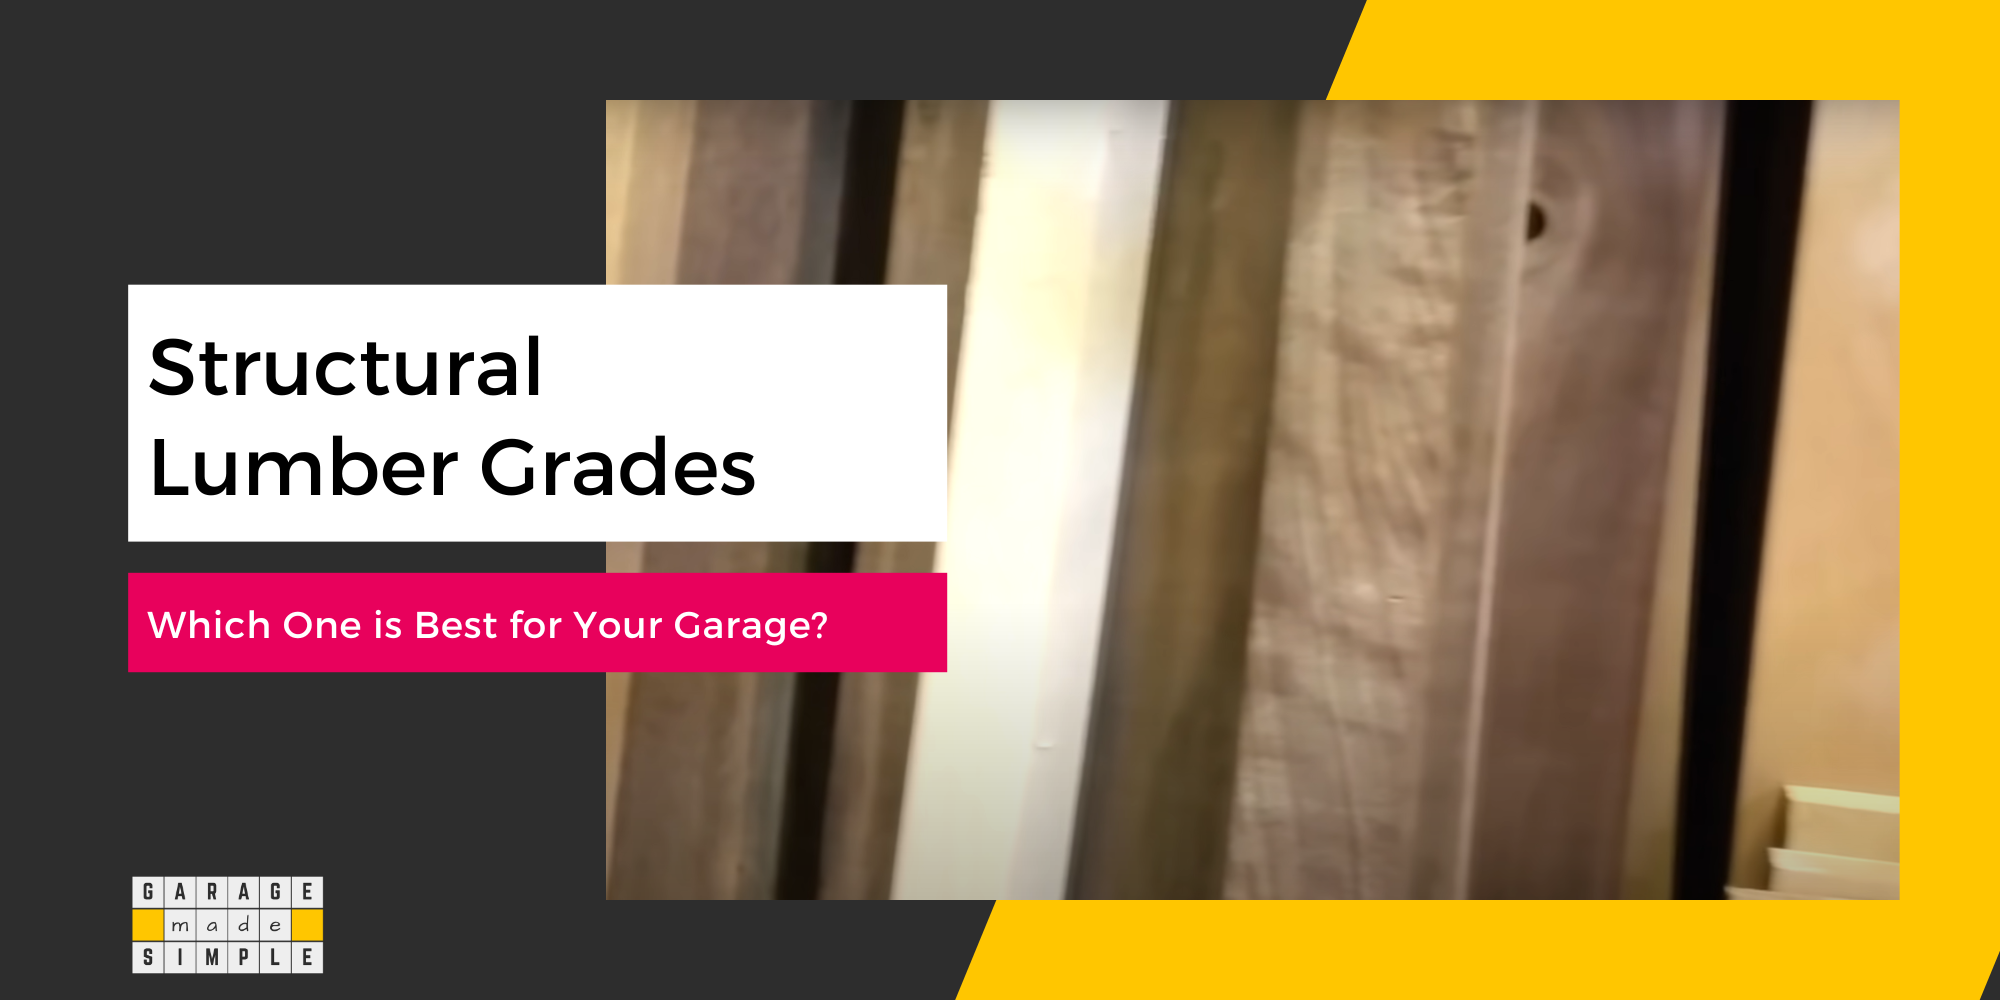 Structural Lumber Grades: Which One is the Best for Your Garage?